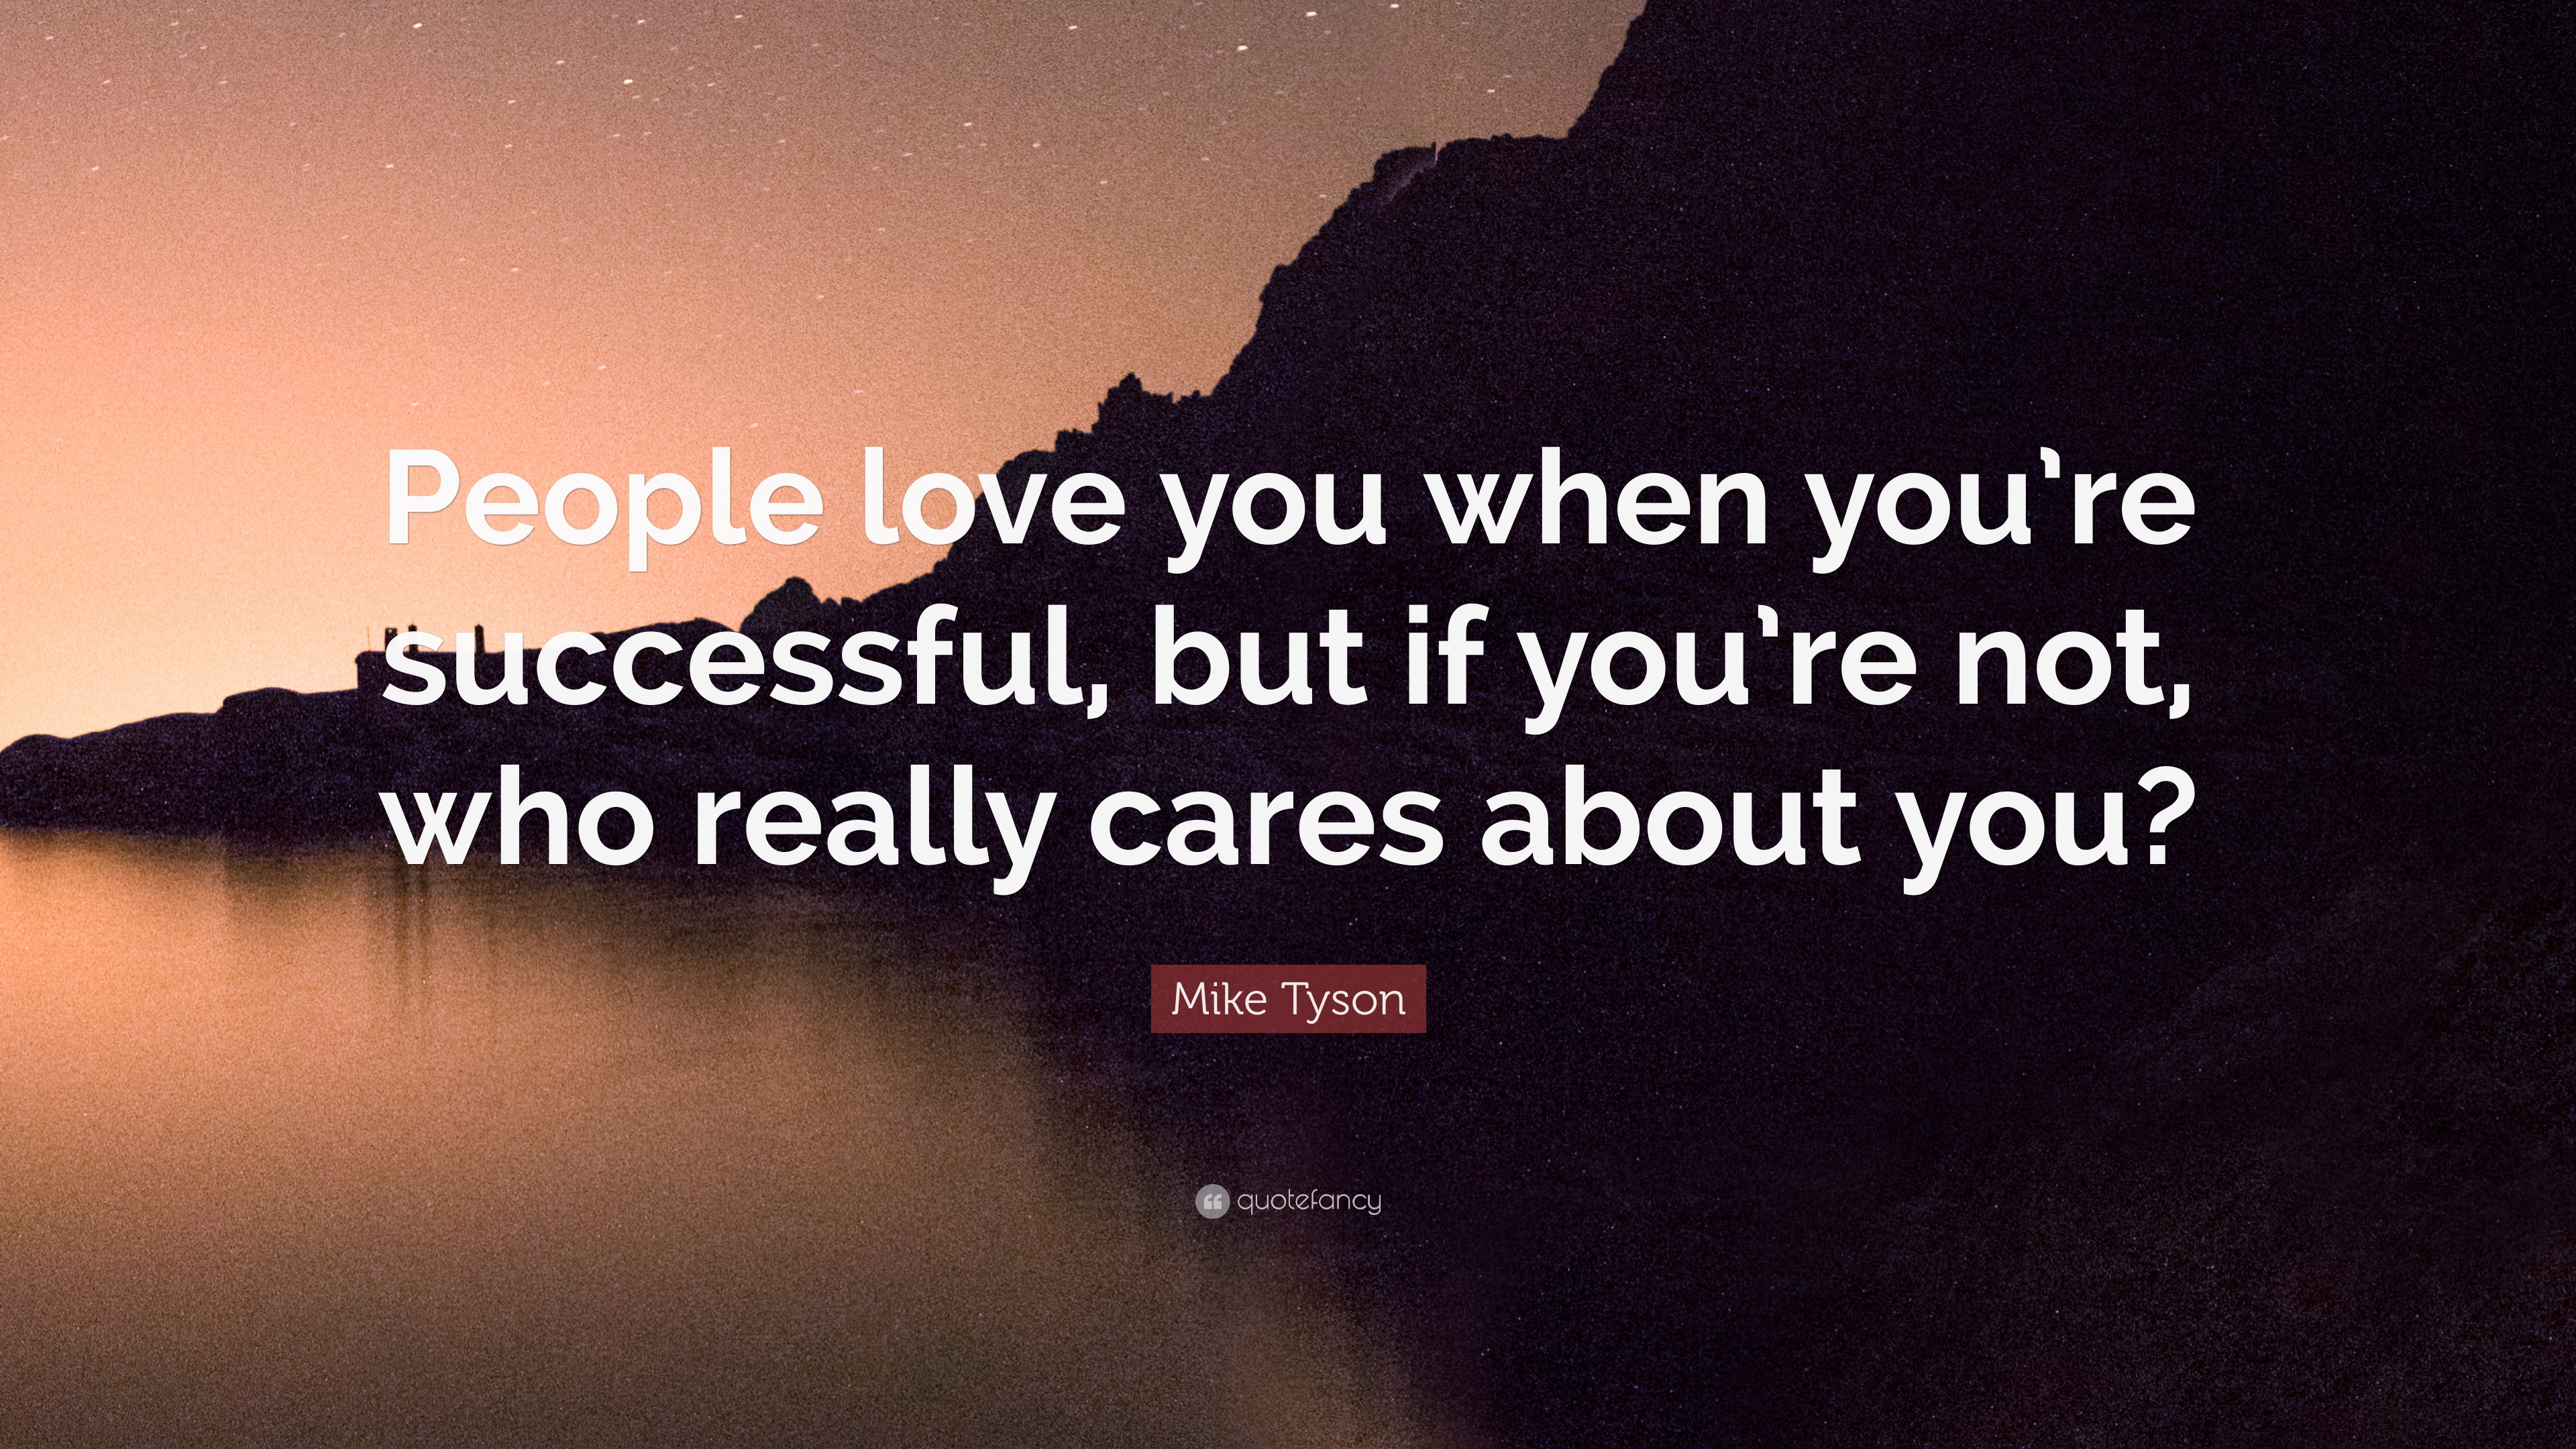 Mike Tyson Quote: “People love you when you’re successful, but if you ...